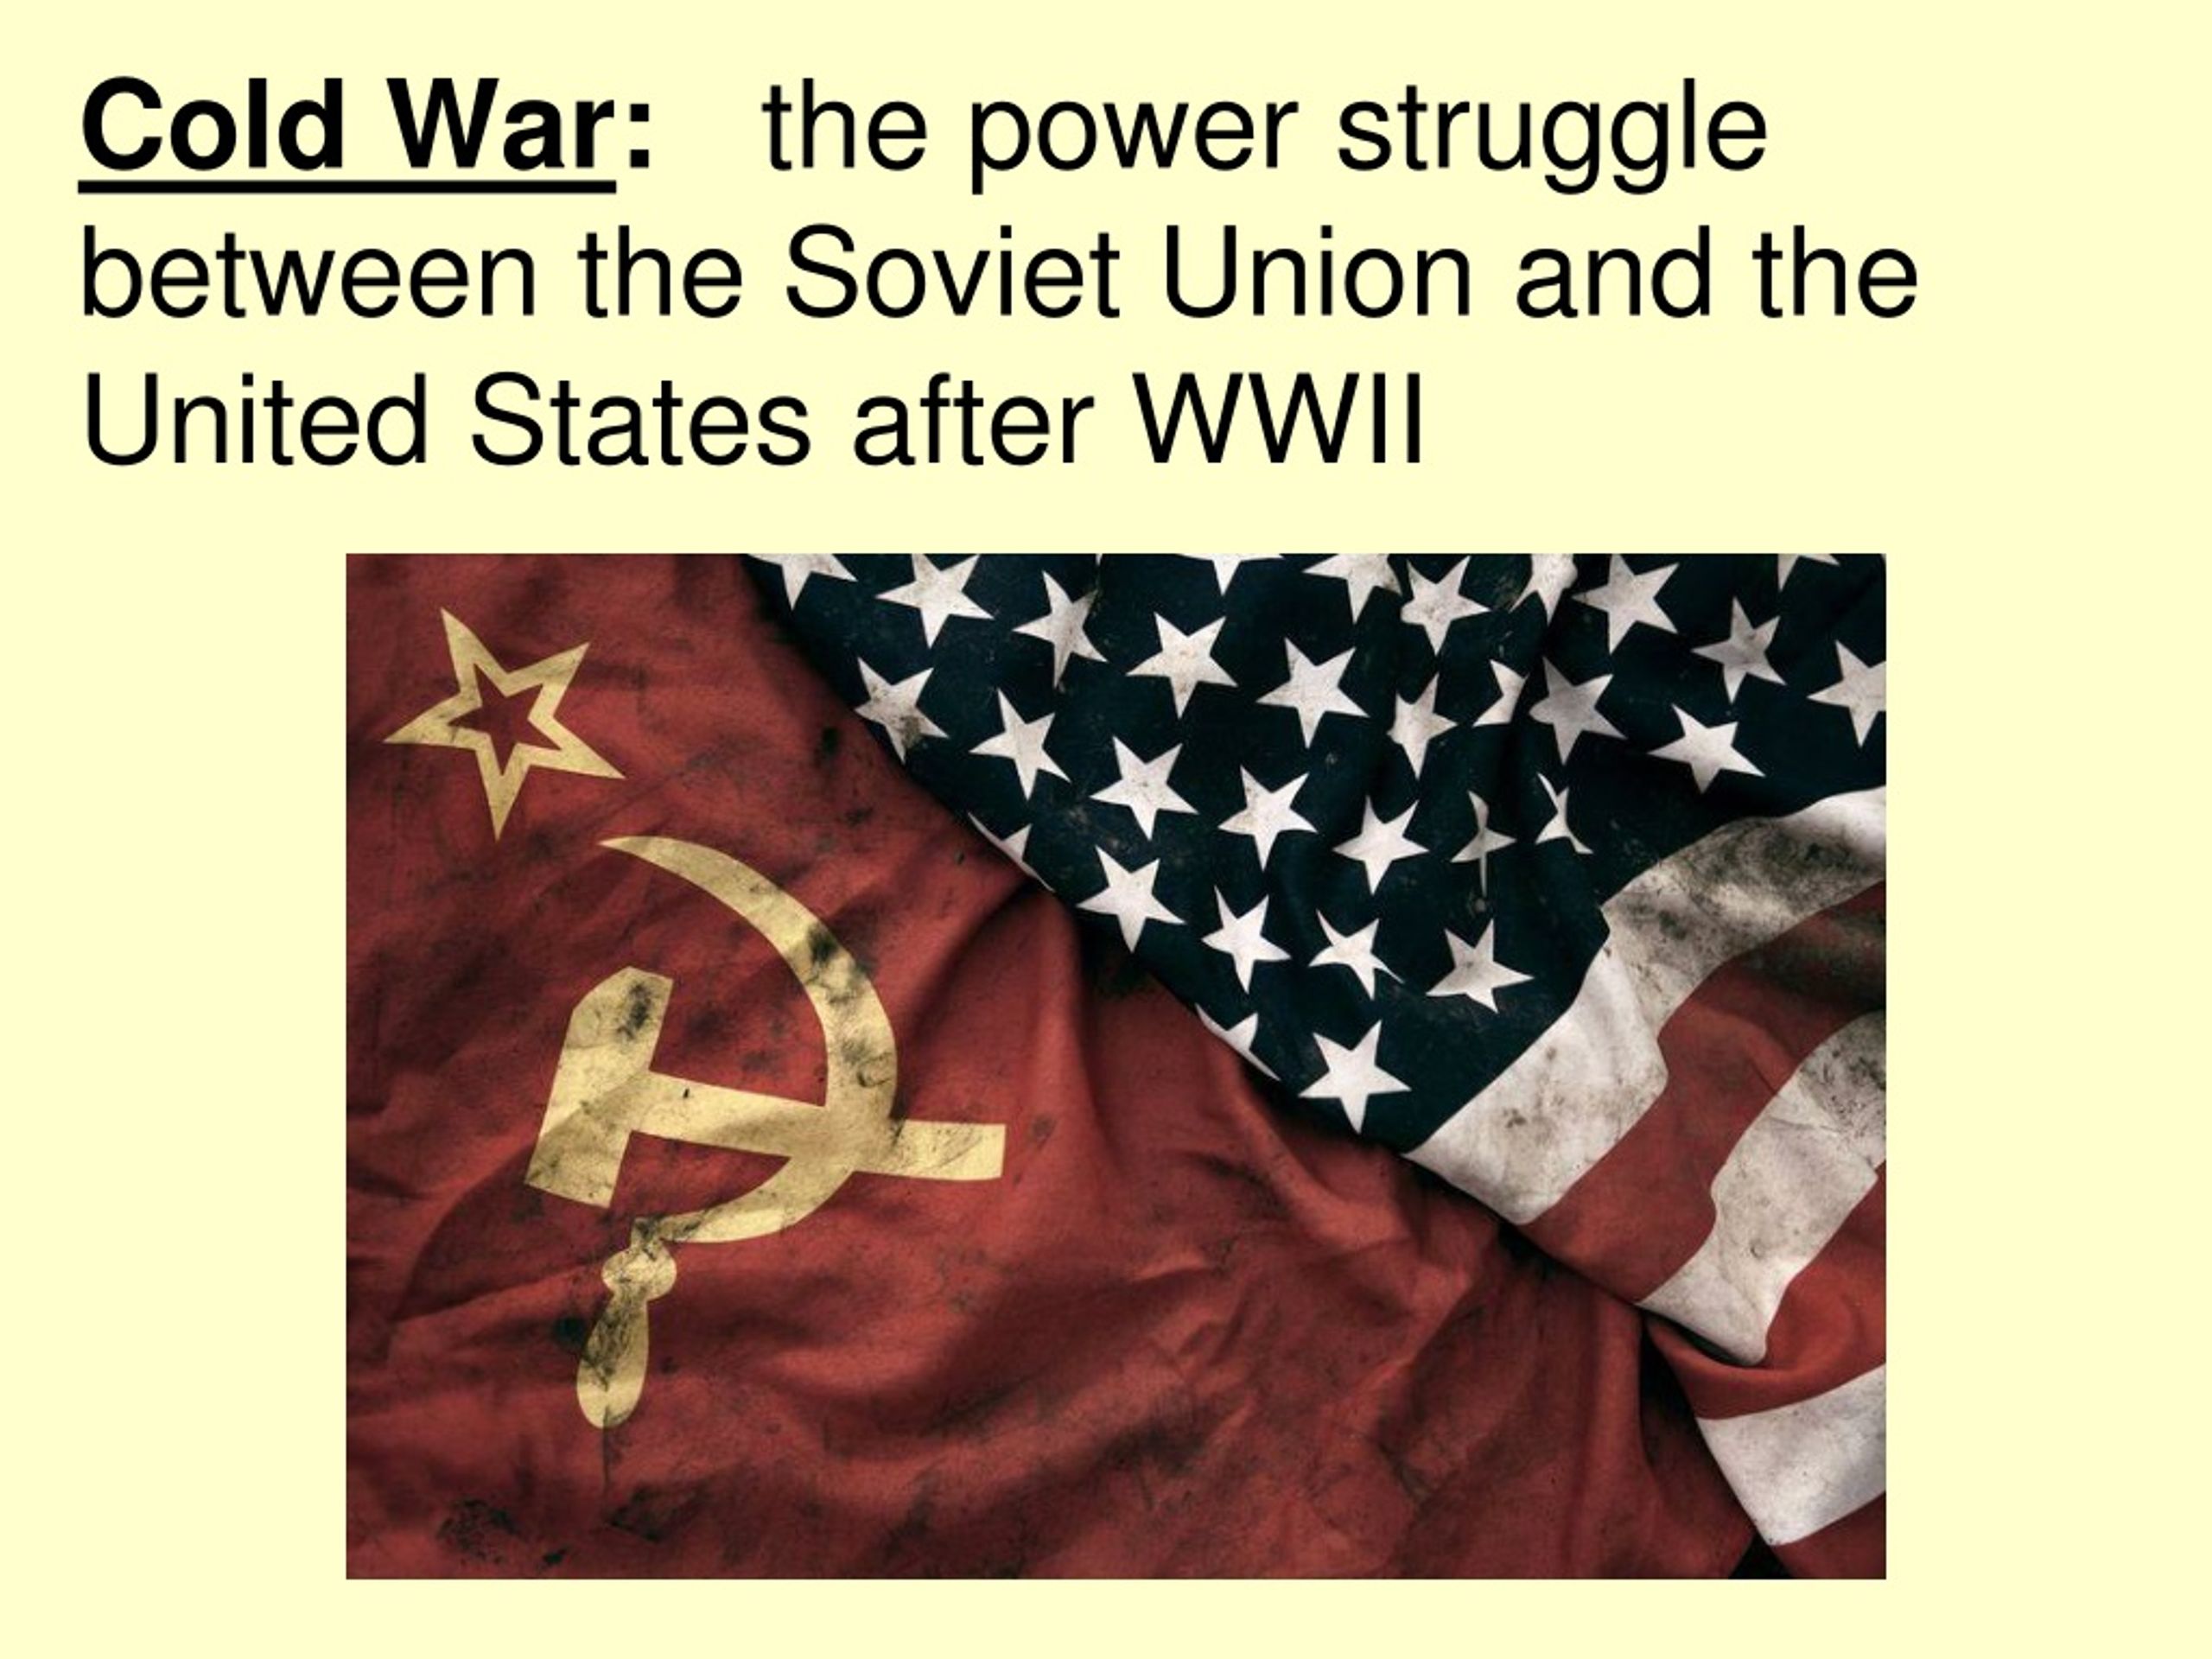 why is the conflict between the us and the soviet union called the cold war